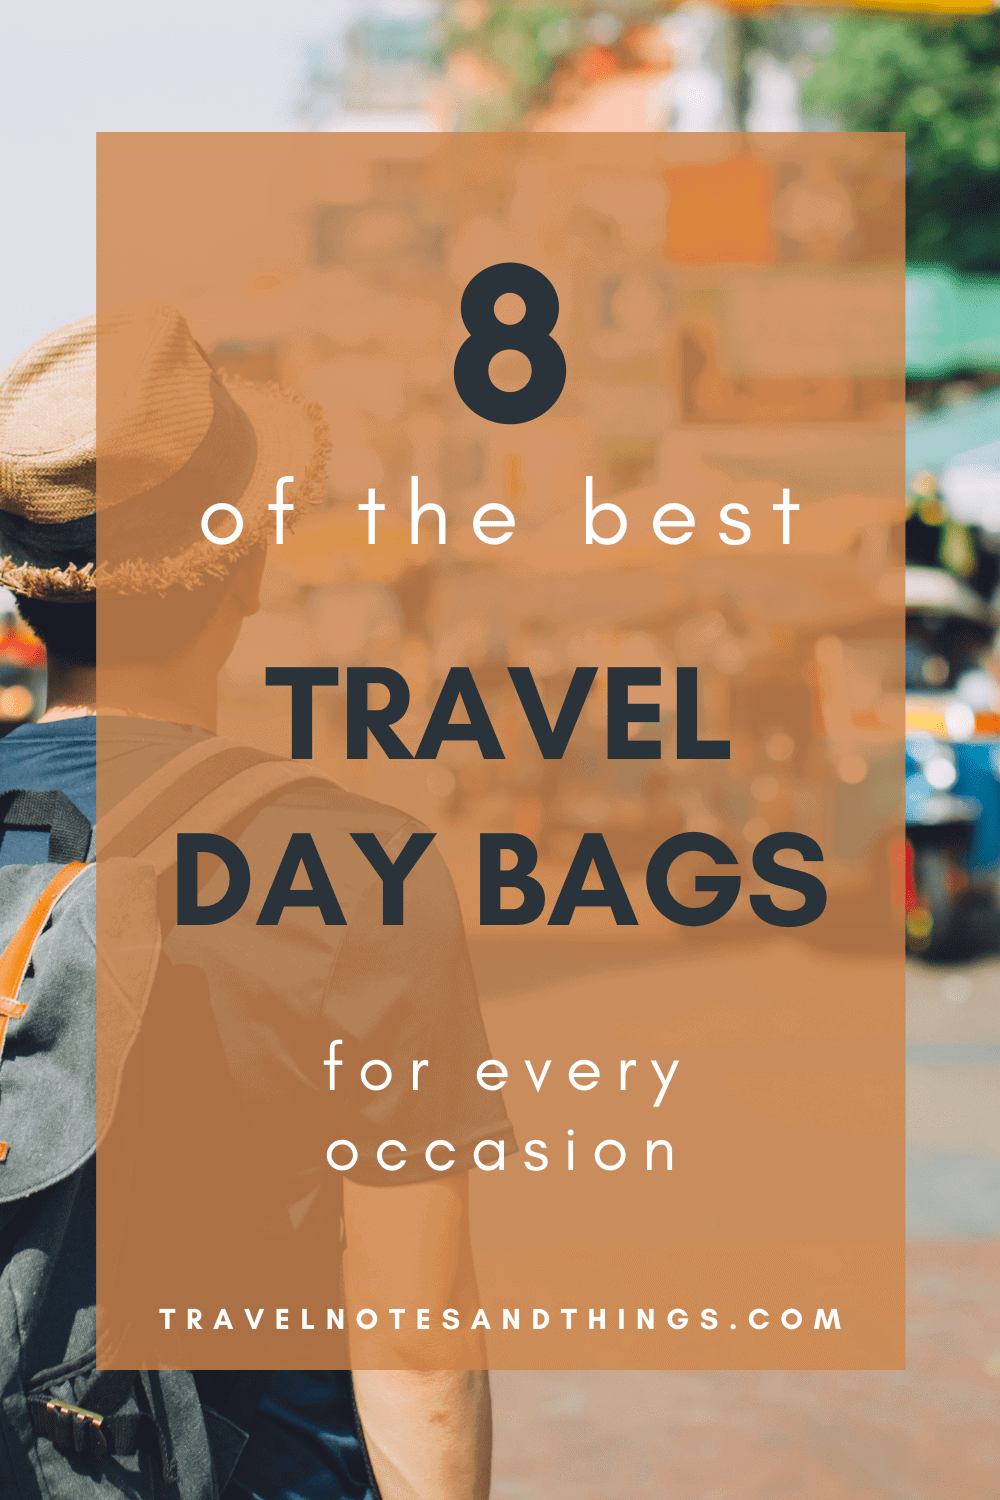 The 8 Best Travel Day Bags For Every Occasion | Travel Notes And Things